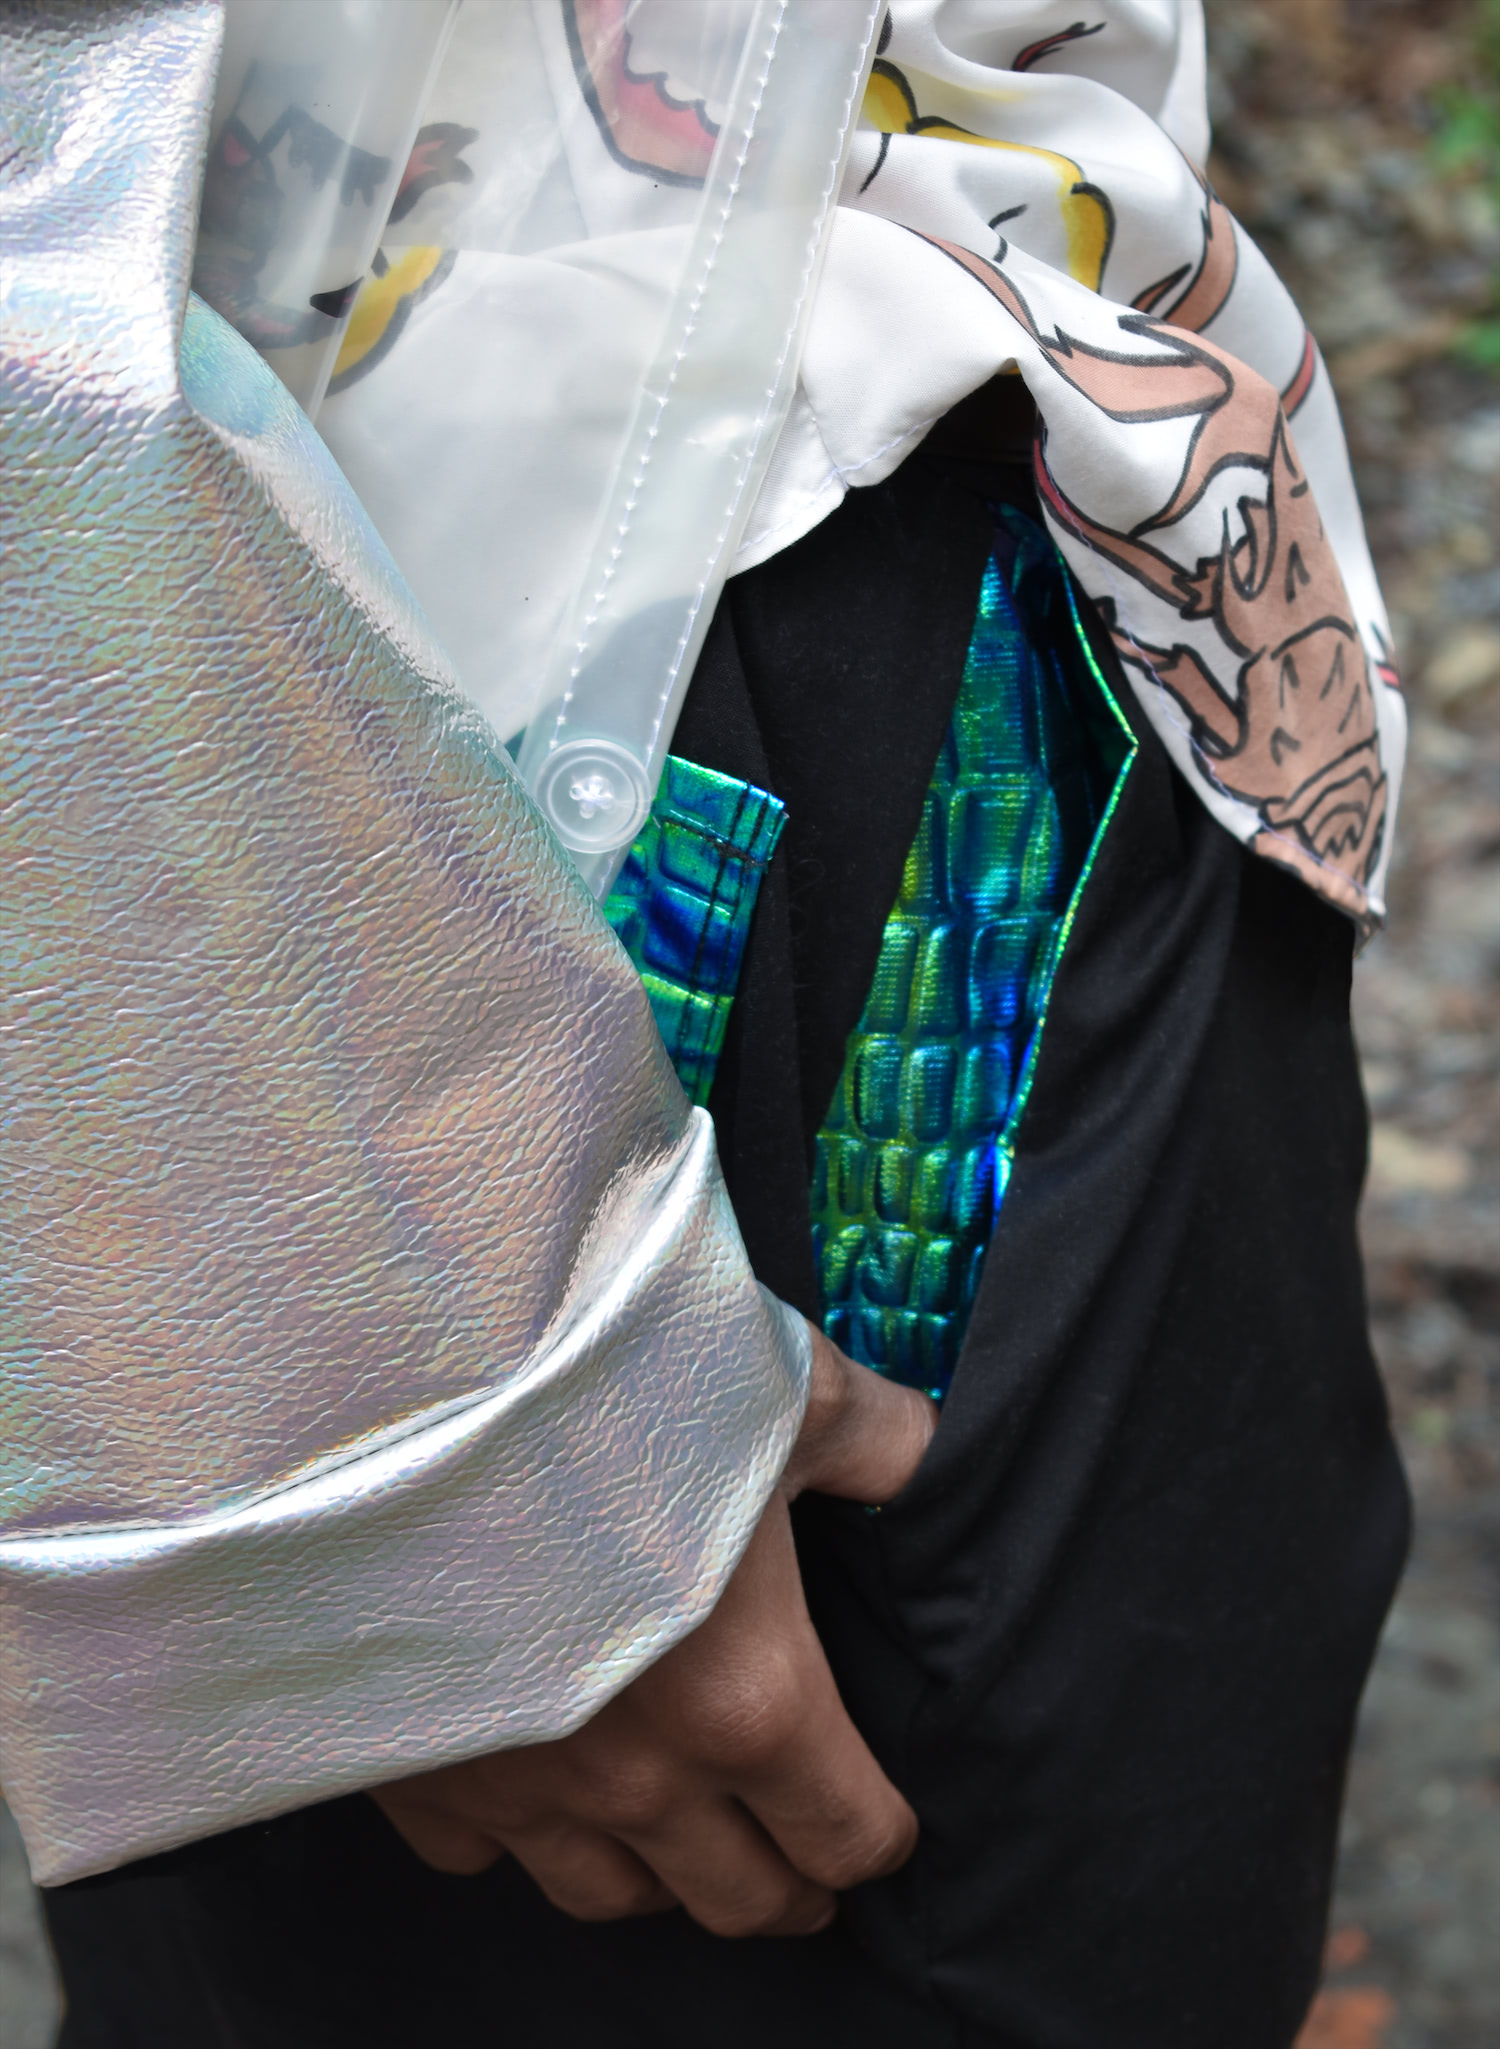 A close up of the man's jacket sleeve and pants pocket. The inside of the pocket is a scaly green/blue material that shines in the light. The cuff of the jacket sleeve is a silvery iridescent material.